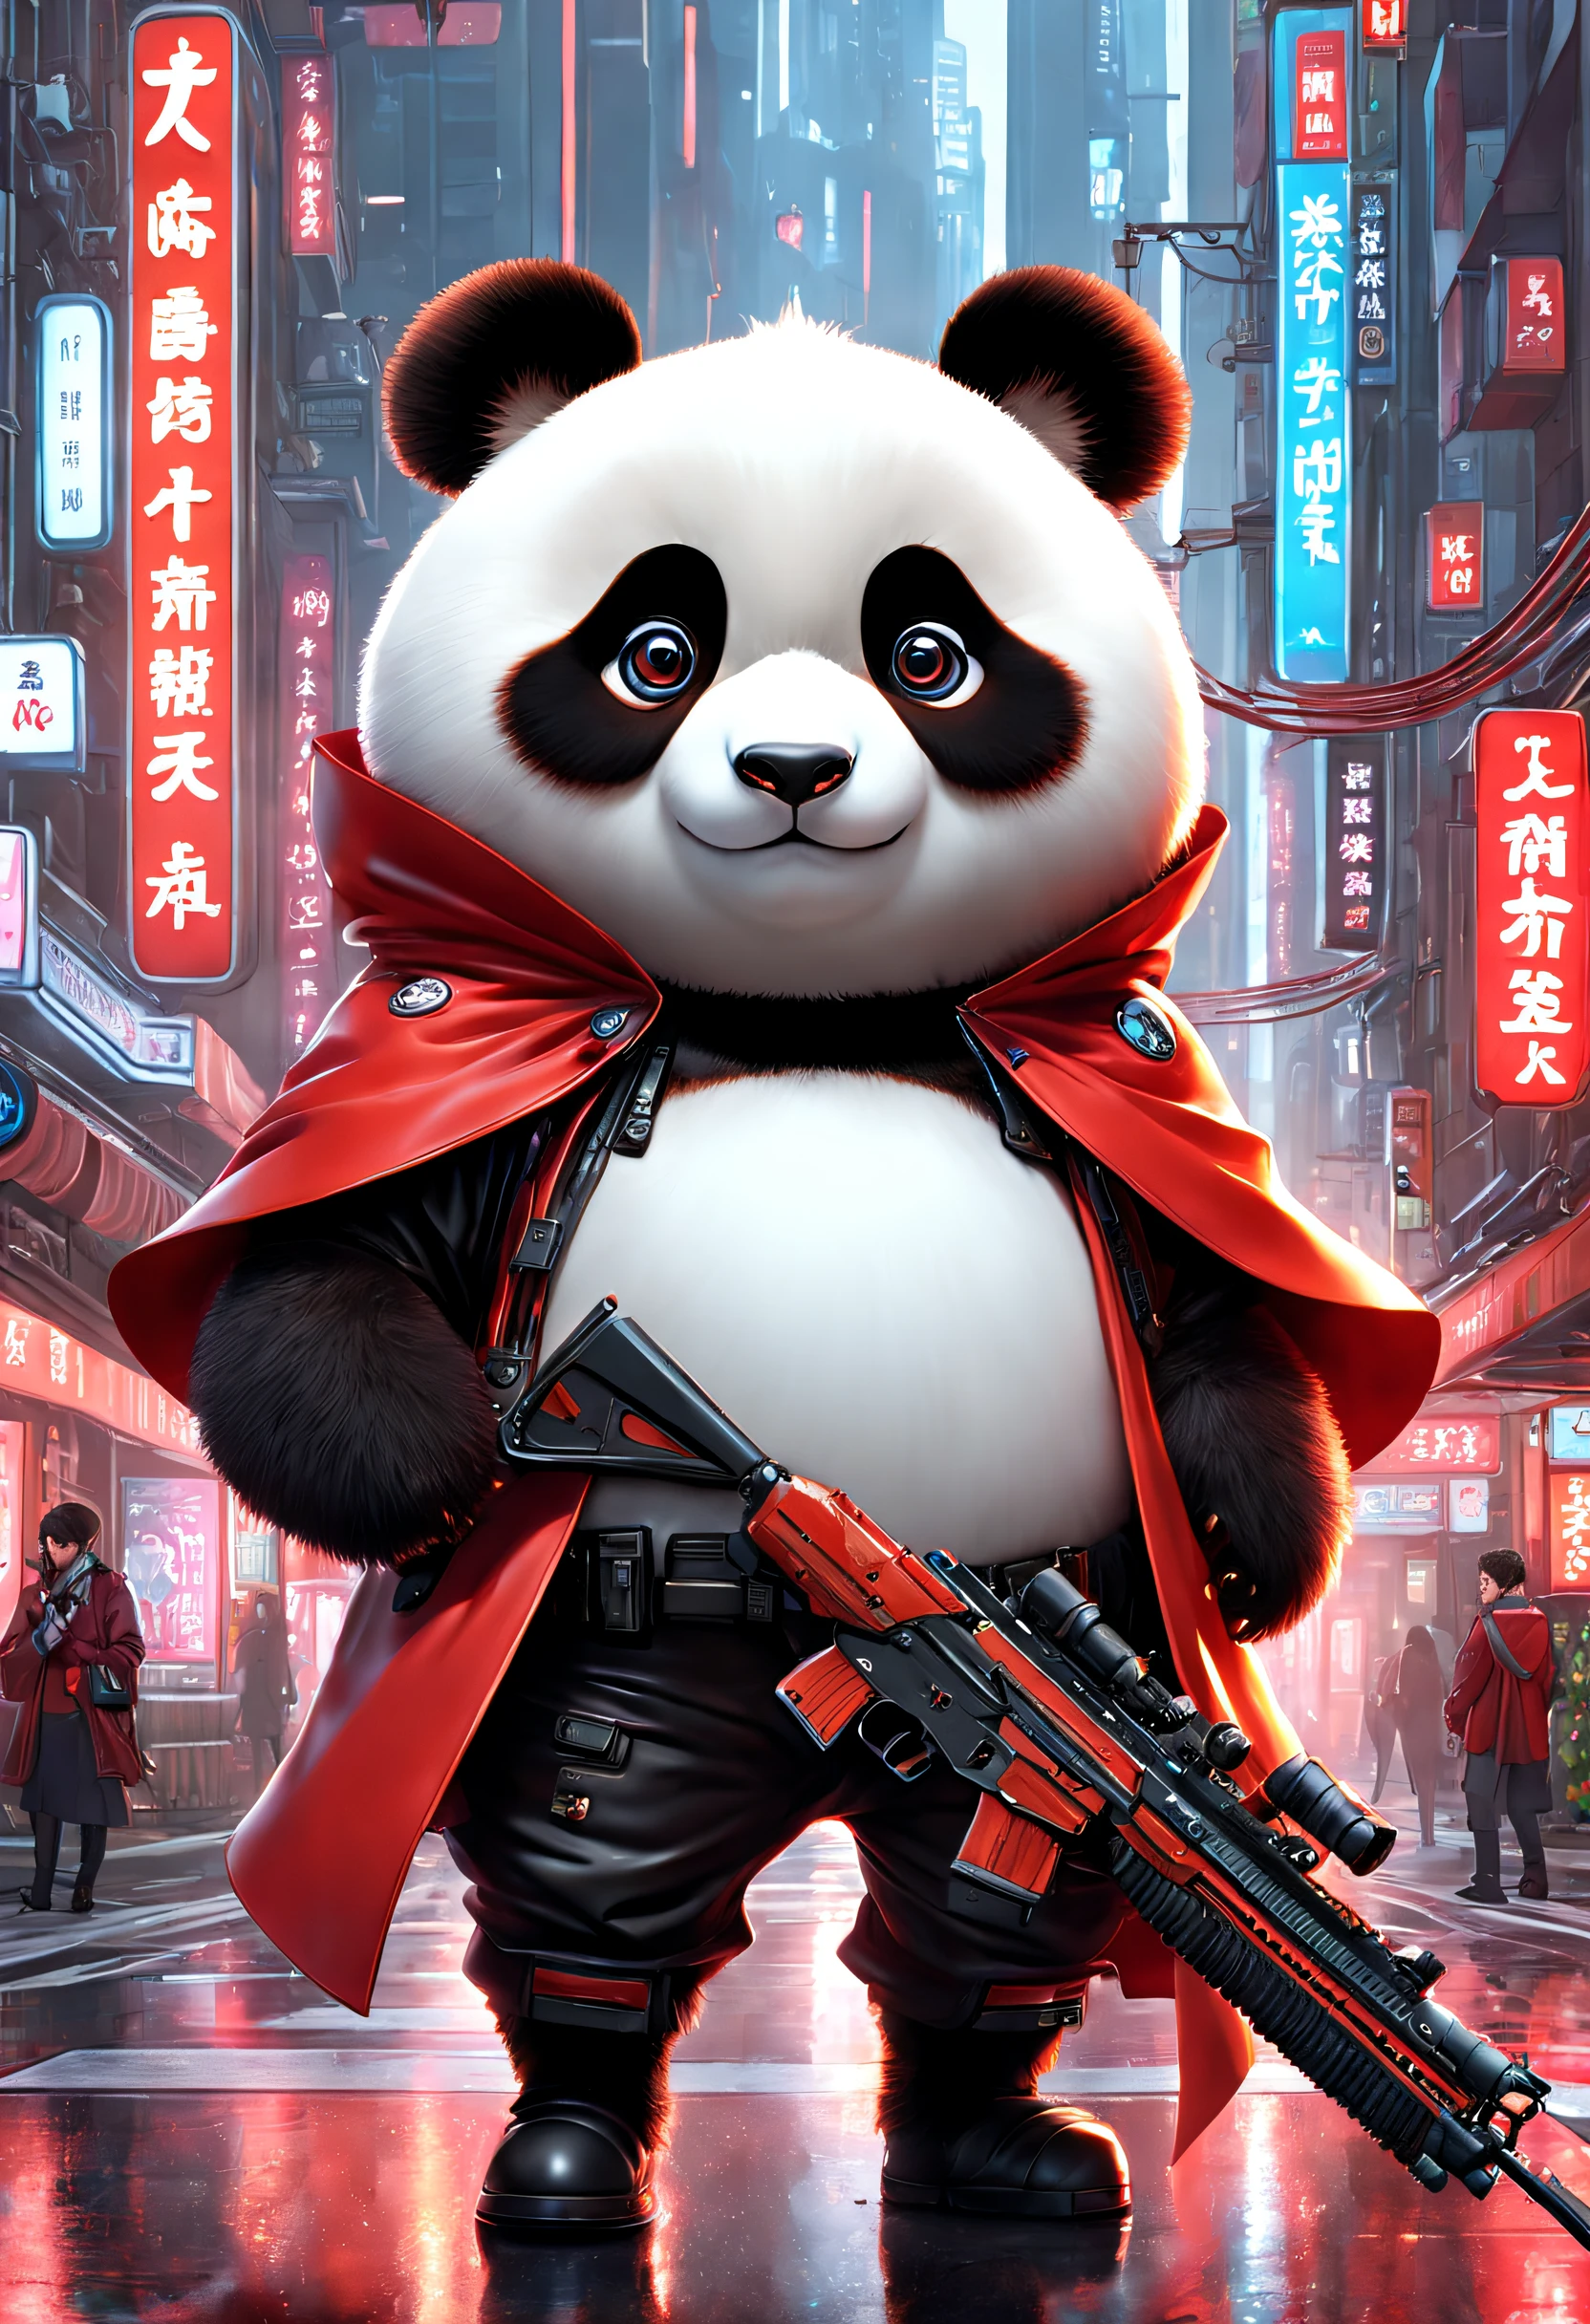 A man wearing a rifle、Panda wearing red cloak, Cyberpunk dystopian style, Charming characters, Huang Shilin, Full of energy and action, Randomly dispersed, white and orange, Flick, Surrealistic atmosphere style, Michael Cormack, Urban intervention, Code-based authoring, intense close-ups, real time transmission, Featured animals, Charming characters, kawaii chic style, 32k ULTRAHD, air brush art, Detailed miniature model, Dark, miki asai&#39;styled, 32k ULTRAHD, Dark beige and red, Kawaii art style, Photorealistic rendering, 32k ULTRAHD, Detailed pubic hair, Charming illustration, Player core，(Best quality,4K,8K,A high resolution,tmasterpiece:1.2),ultra - detailed,(actual,realistically,realistically:1.37),